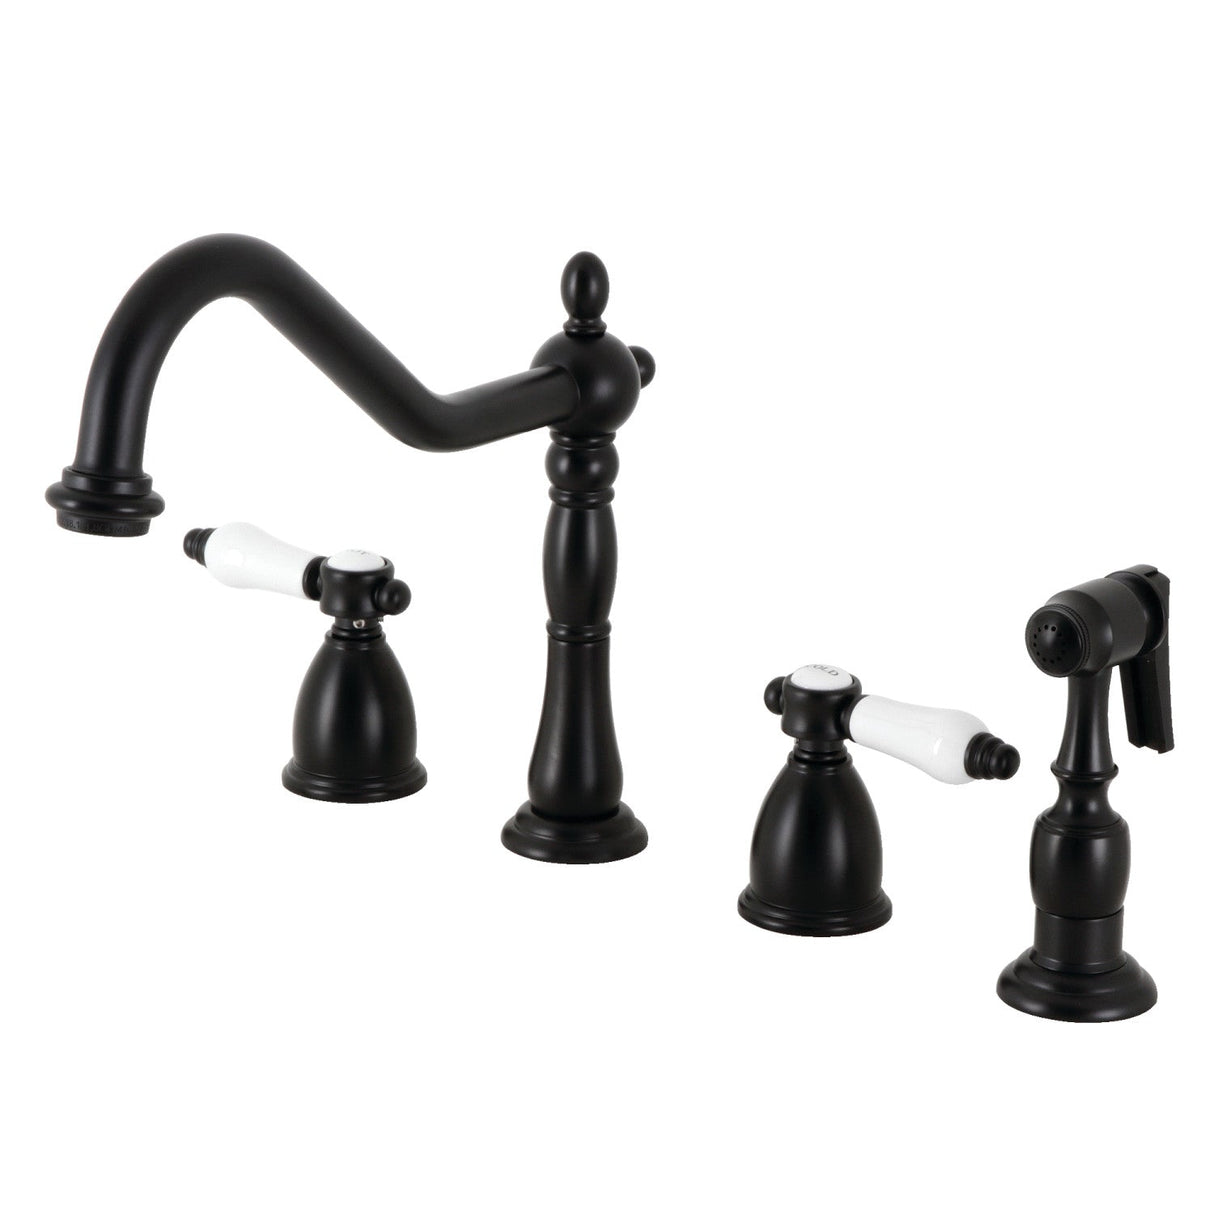 Bel-Air KB1790BPLBS Two-Handle 4-Hole Deck Mount Widespread Kitchen Faucet with Brass Sprayer, Matte Black